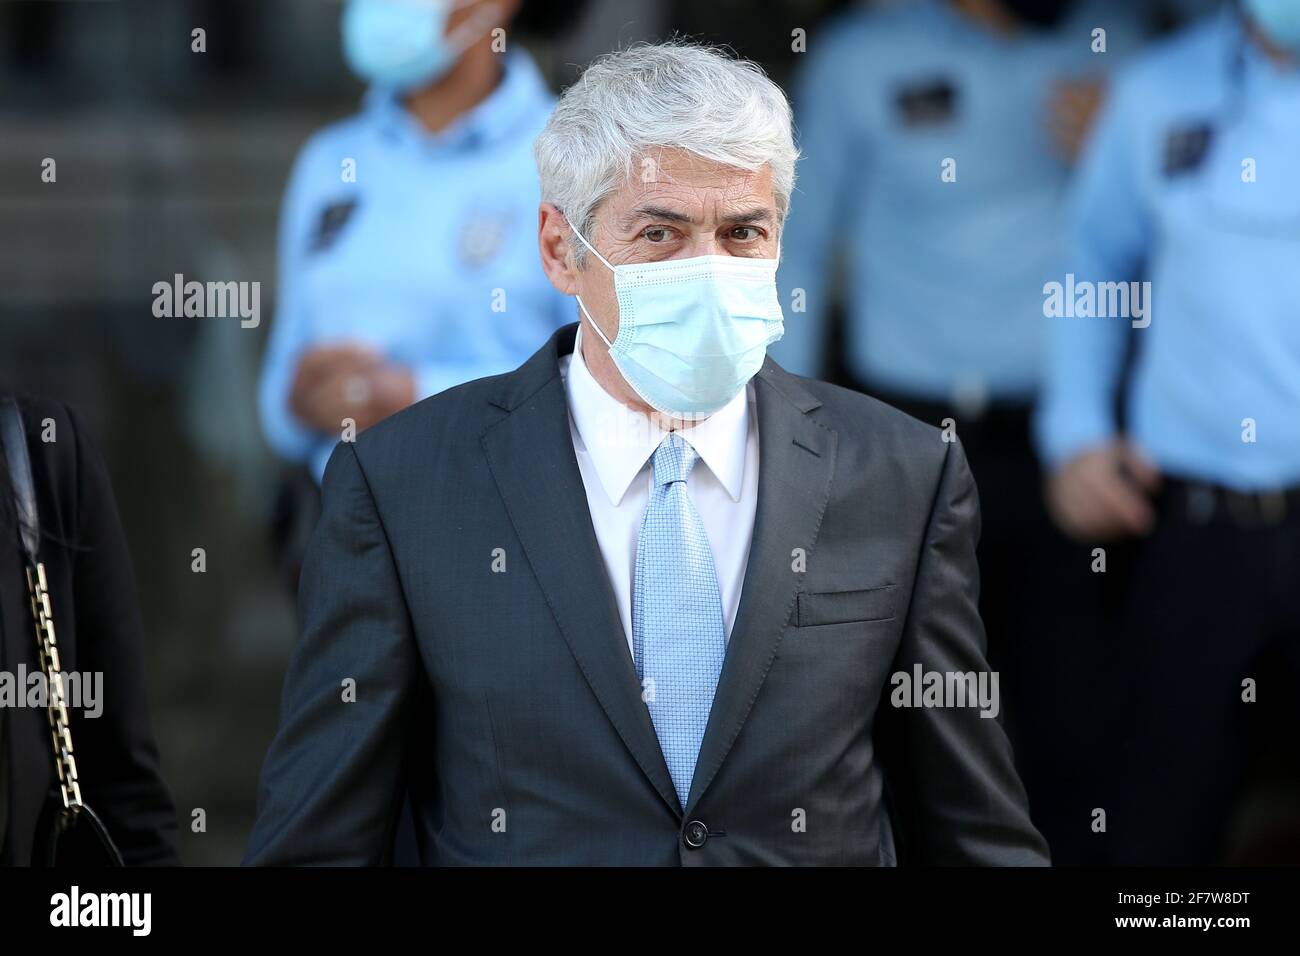 Lisbon, Portugal. 9th Apr, 2021. Portugal's former Prime Minister Jose Socrates wearing a face mask leaves the court in Lisbon, Portugal, April 9, 2021. Portugal's former prime minister Jose Socrates will be the country's first head of government to stand trial, having been indicted for money laundering and forgery of documents, according to a decision by Judge Ivo Rosa on Friday. Credit: Petro Fiuza/Xinhua/Alamy Live News Stock Photo